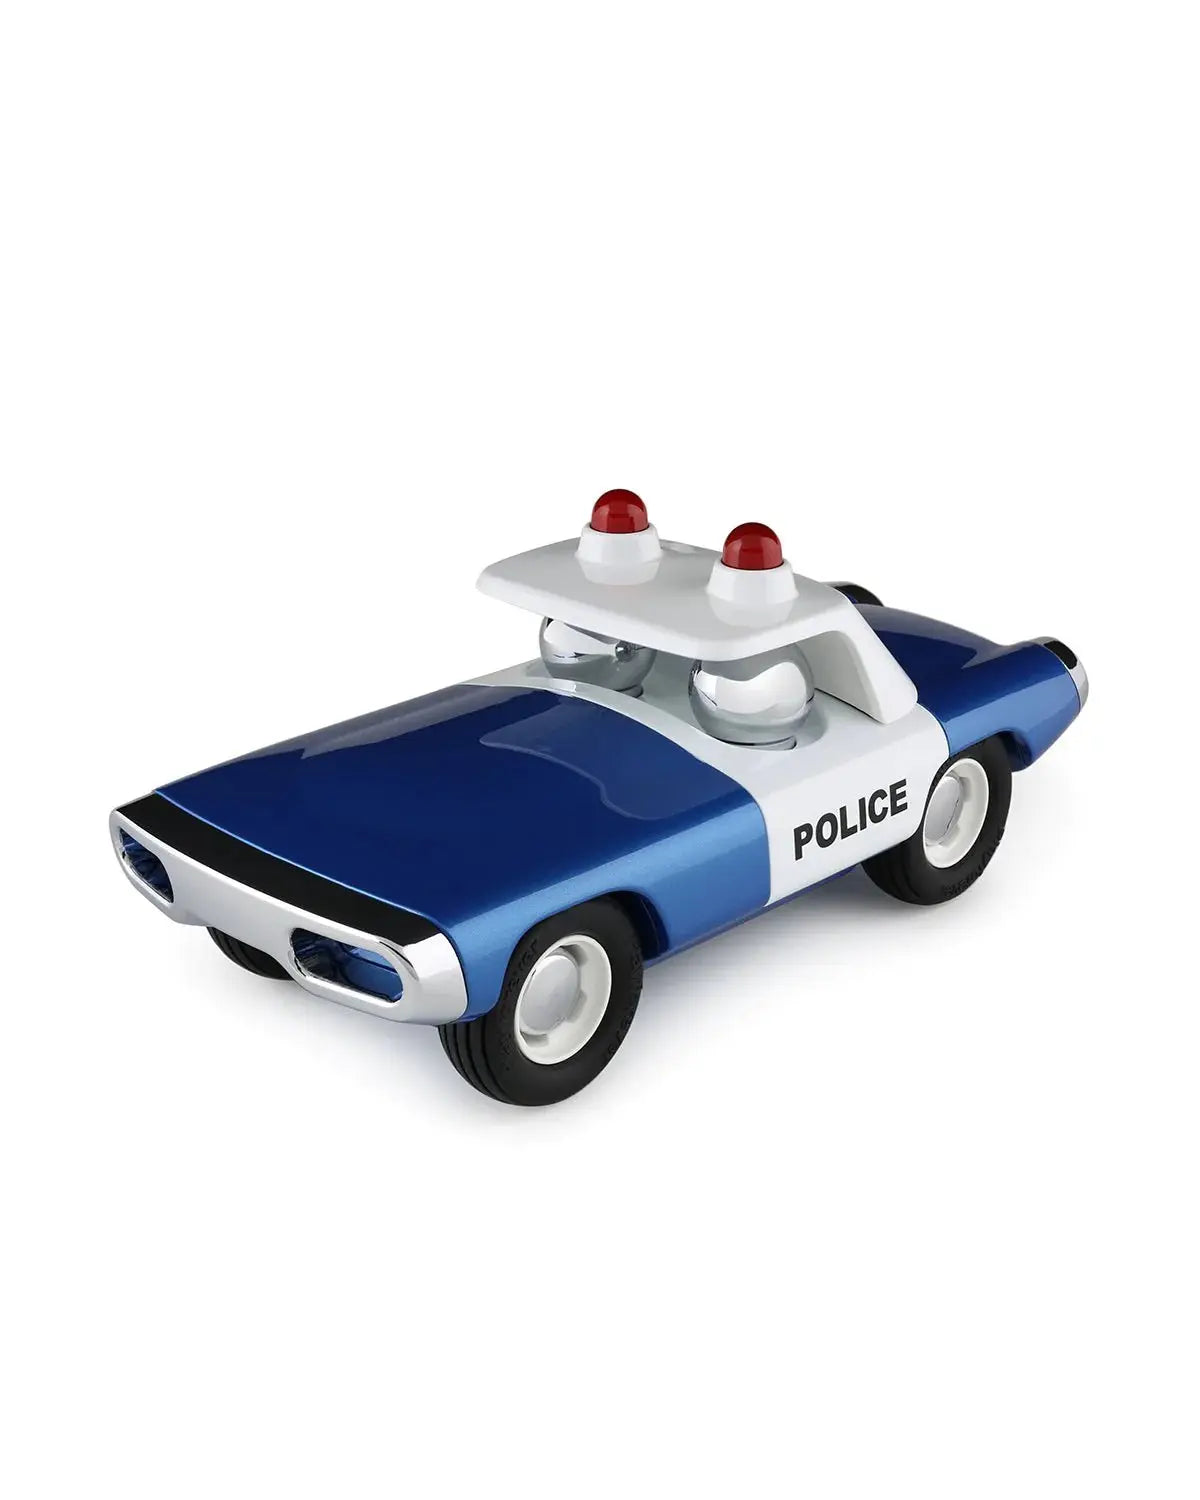 Playforever Car Maverick Heat, 1960s New York Inspired Toy, Collectible Vehicle, Retro Playtime Fun  Playforever Police Blue  